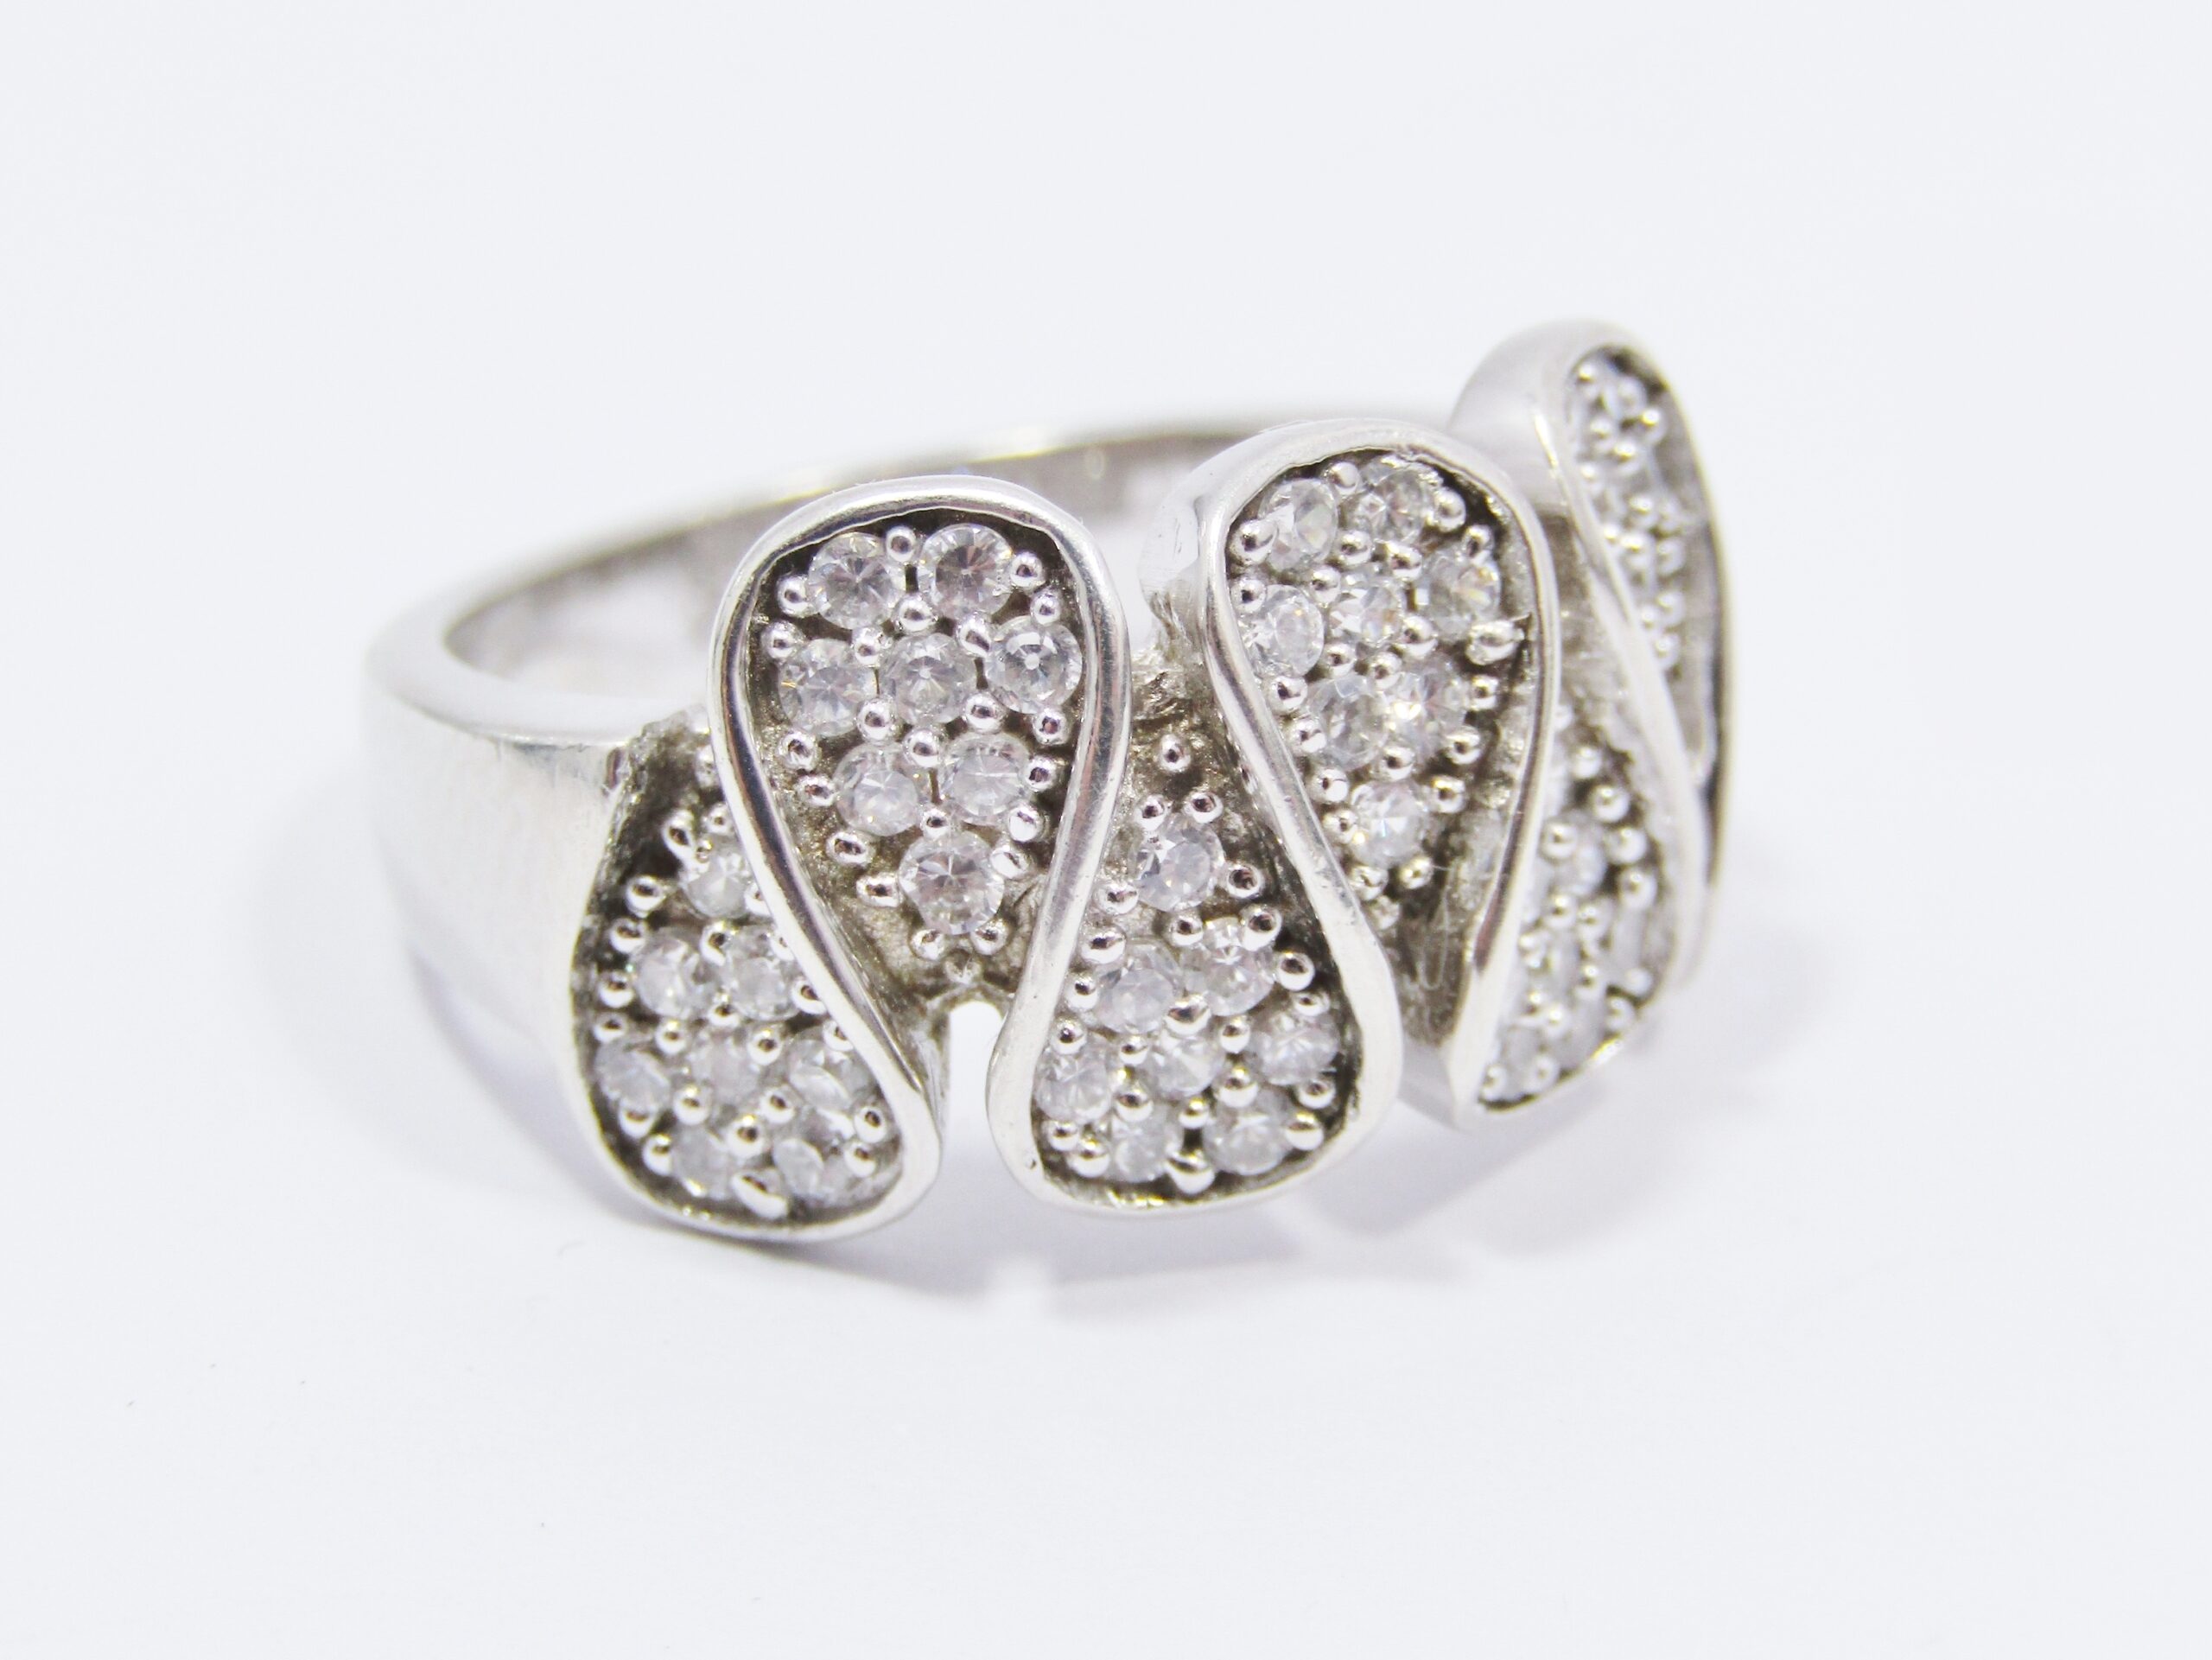 A Gorgeous Swirl Design Ring Encrusted with Tiny Zirconia’s in Sterling Silver